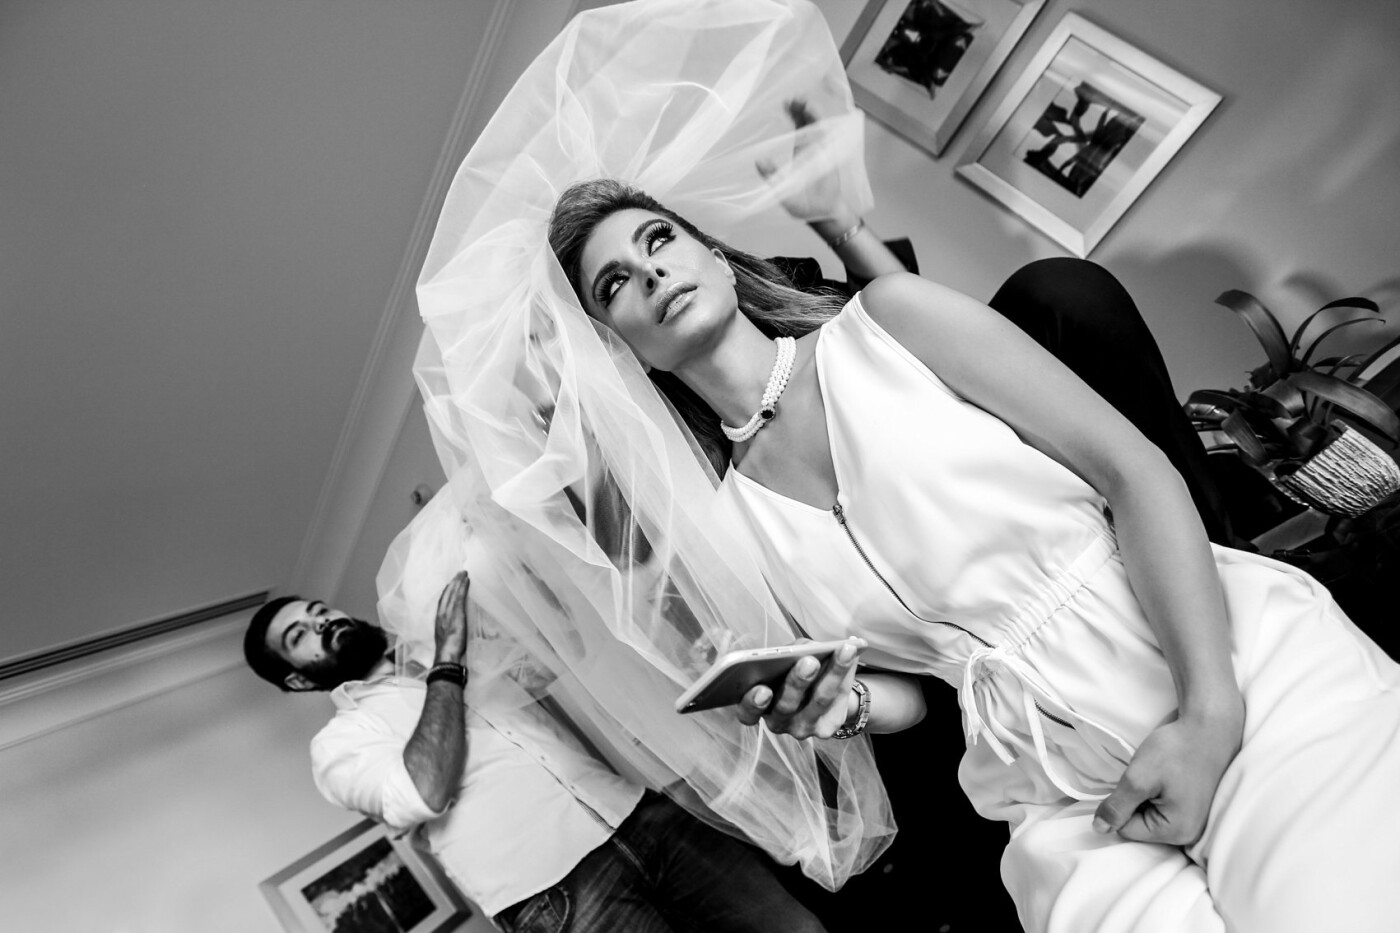 Getting ready photos before the wedding is undoubtedly some of the most genuine and memorable moments of the day. This is one of my favorite classical shots for the bride getting ready, as I admire so many things about it, the lighting, the veil and the look on the bride's face anticipating the moment she's been waiting for, the moment she marries the man she loves.